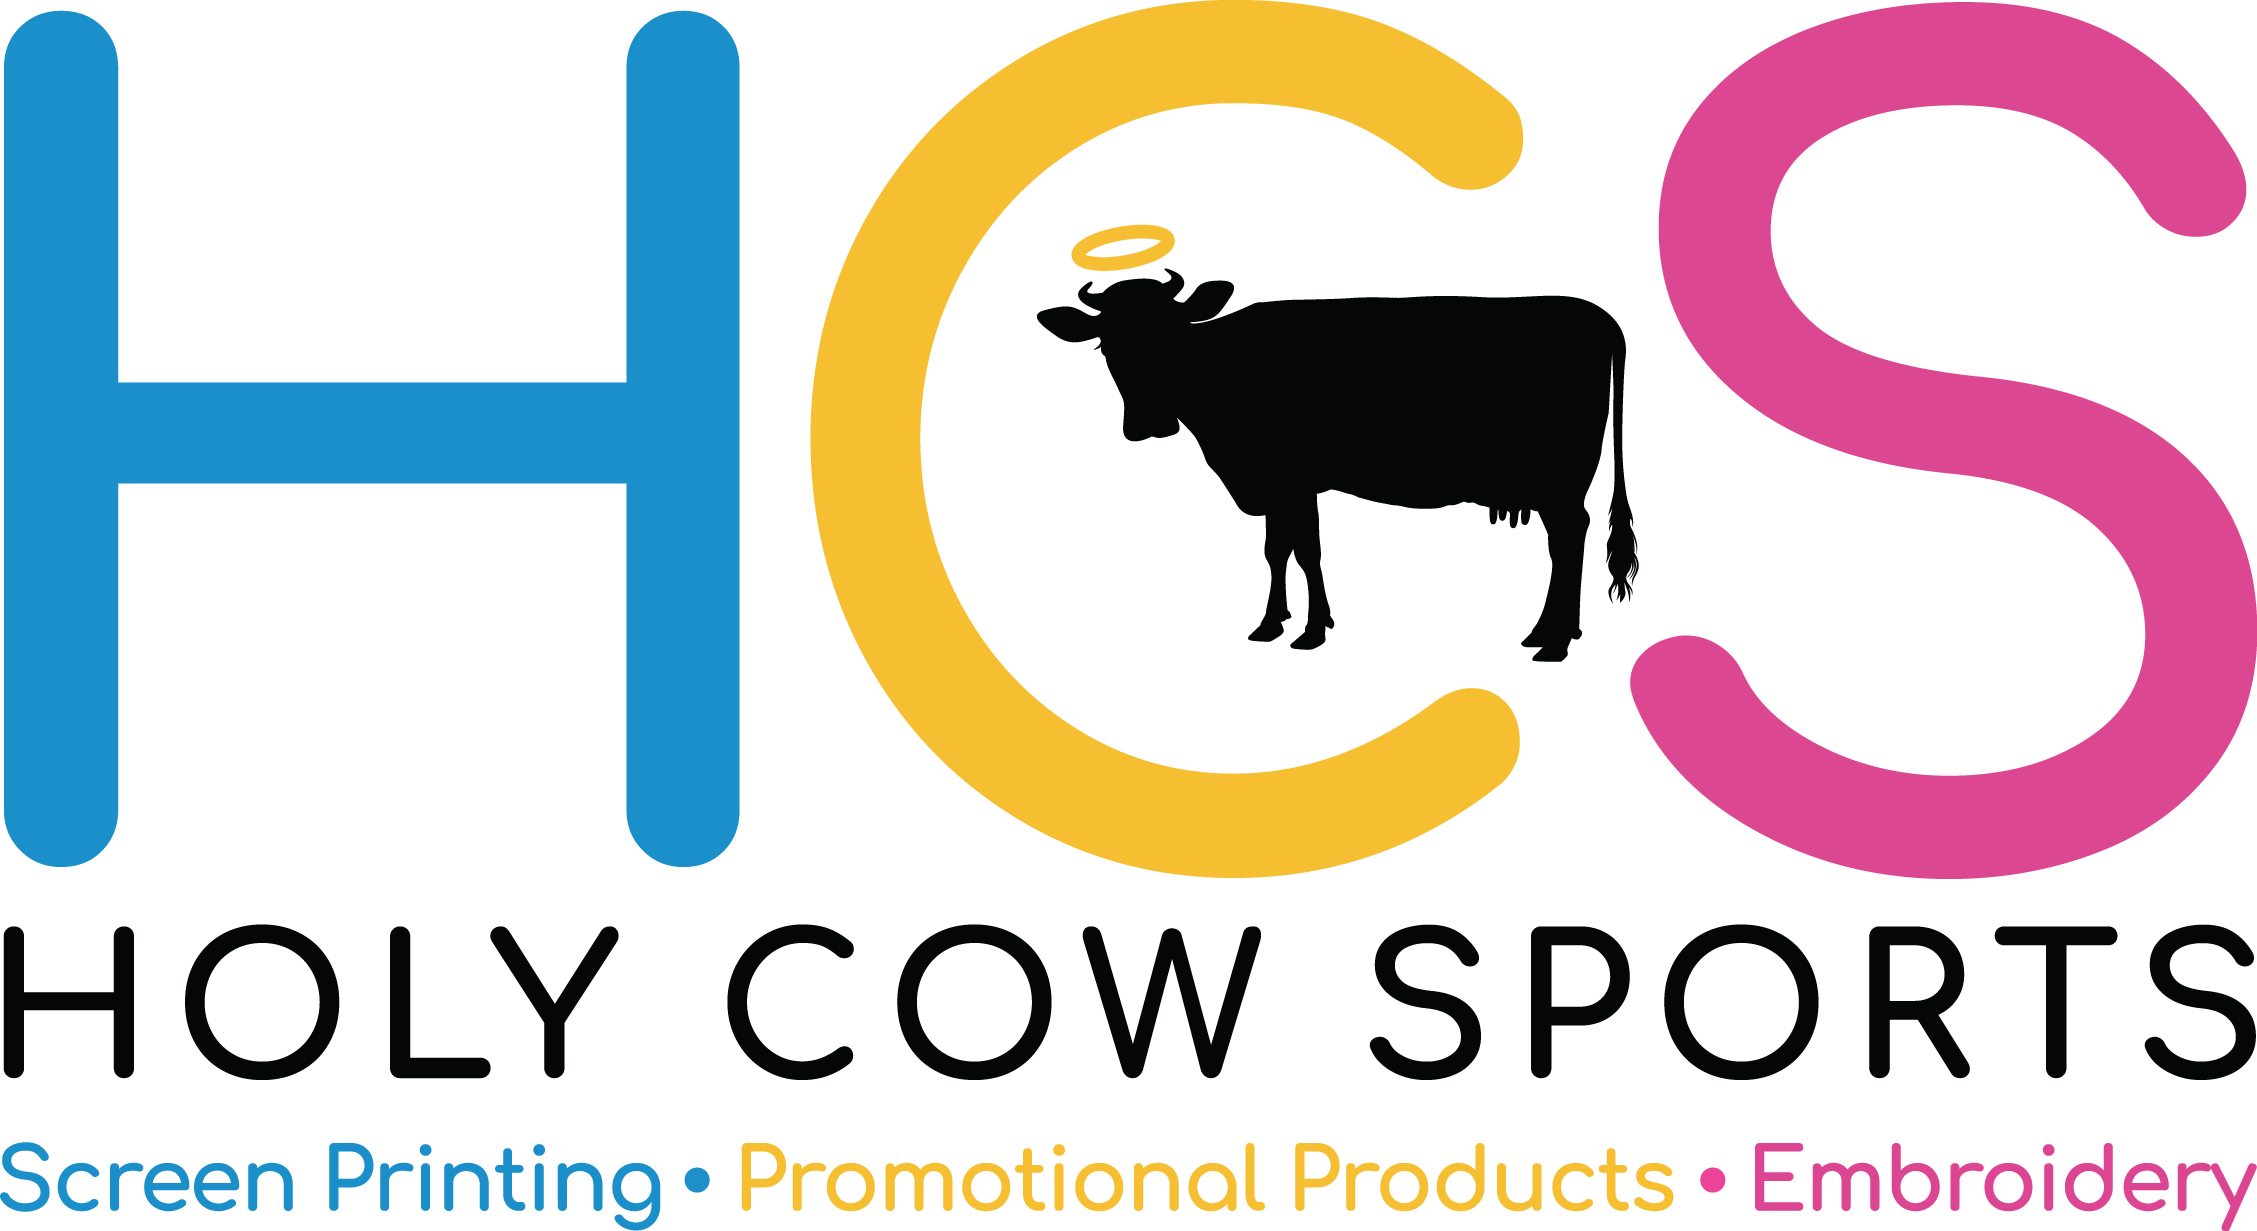 Home - Holy Cow Sports Inc.